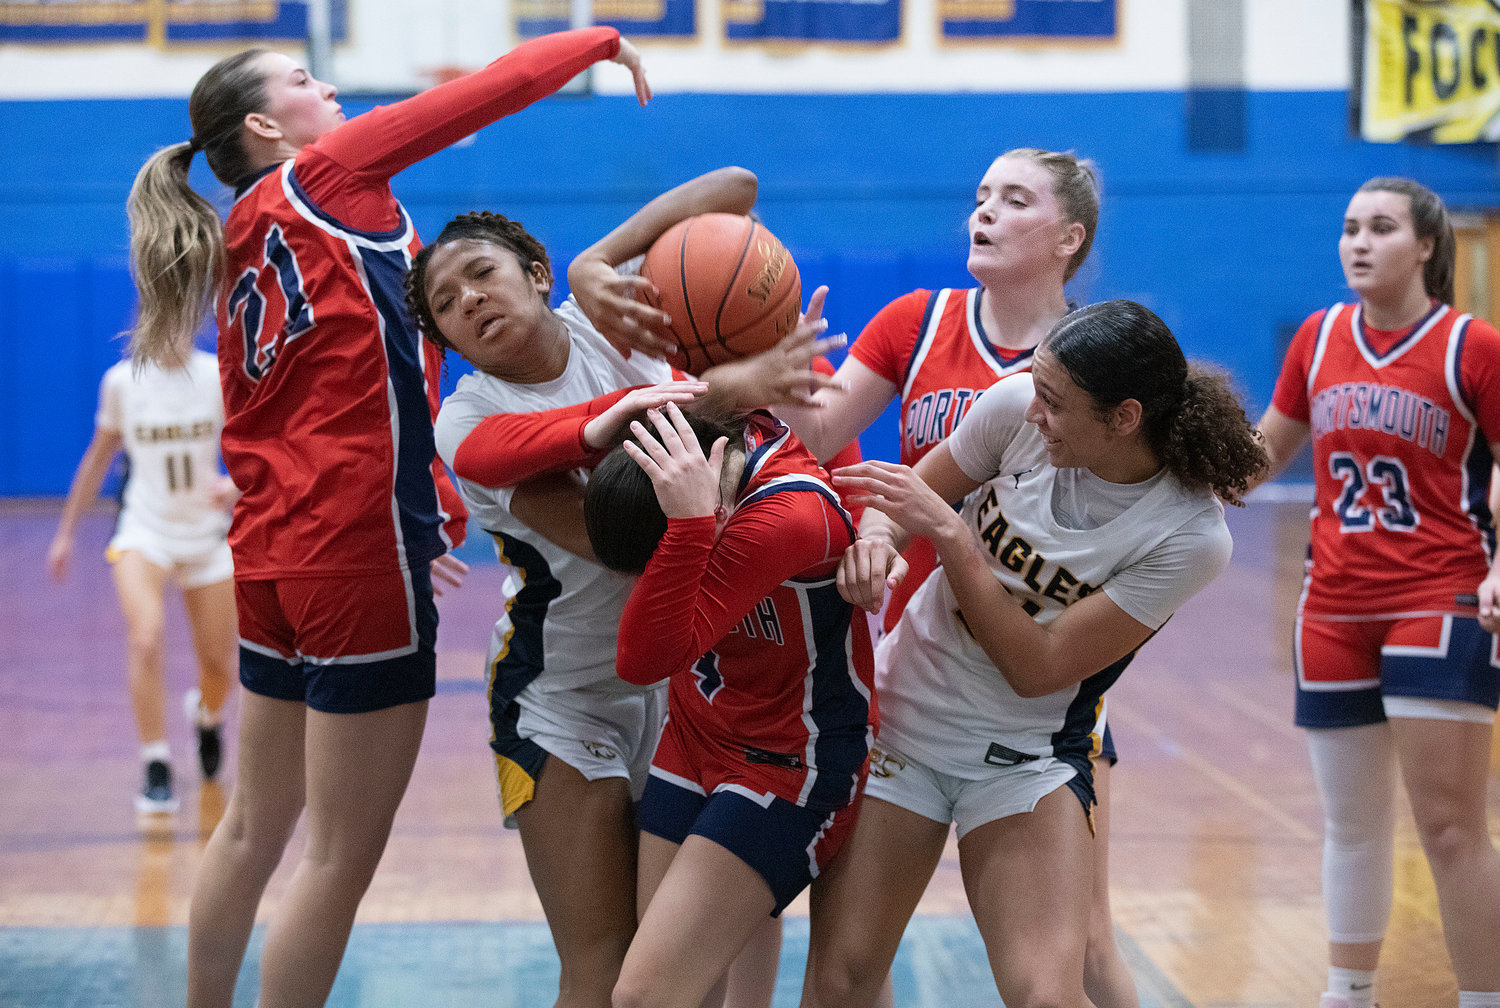 Portsmouth’s Ava Hackley (left) and teammates Olivia Durant and Maeve Tullson fight for a rebound with Barrington’s Lindsey Lamay (left) and Isys Dunphy during the opening game of the girls’ state basketball tournament on March 1.  Emily Maiato is at right. The Patriots upset the Eagles, 46-37.